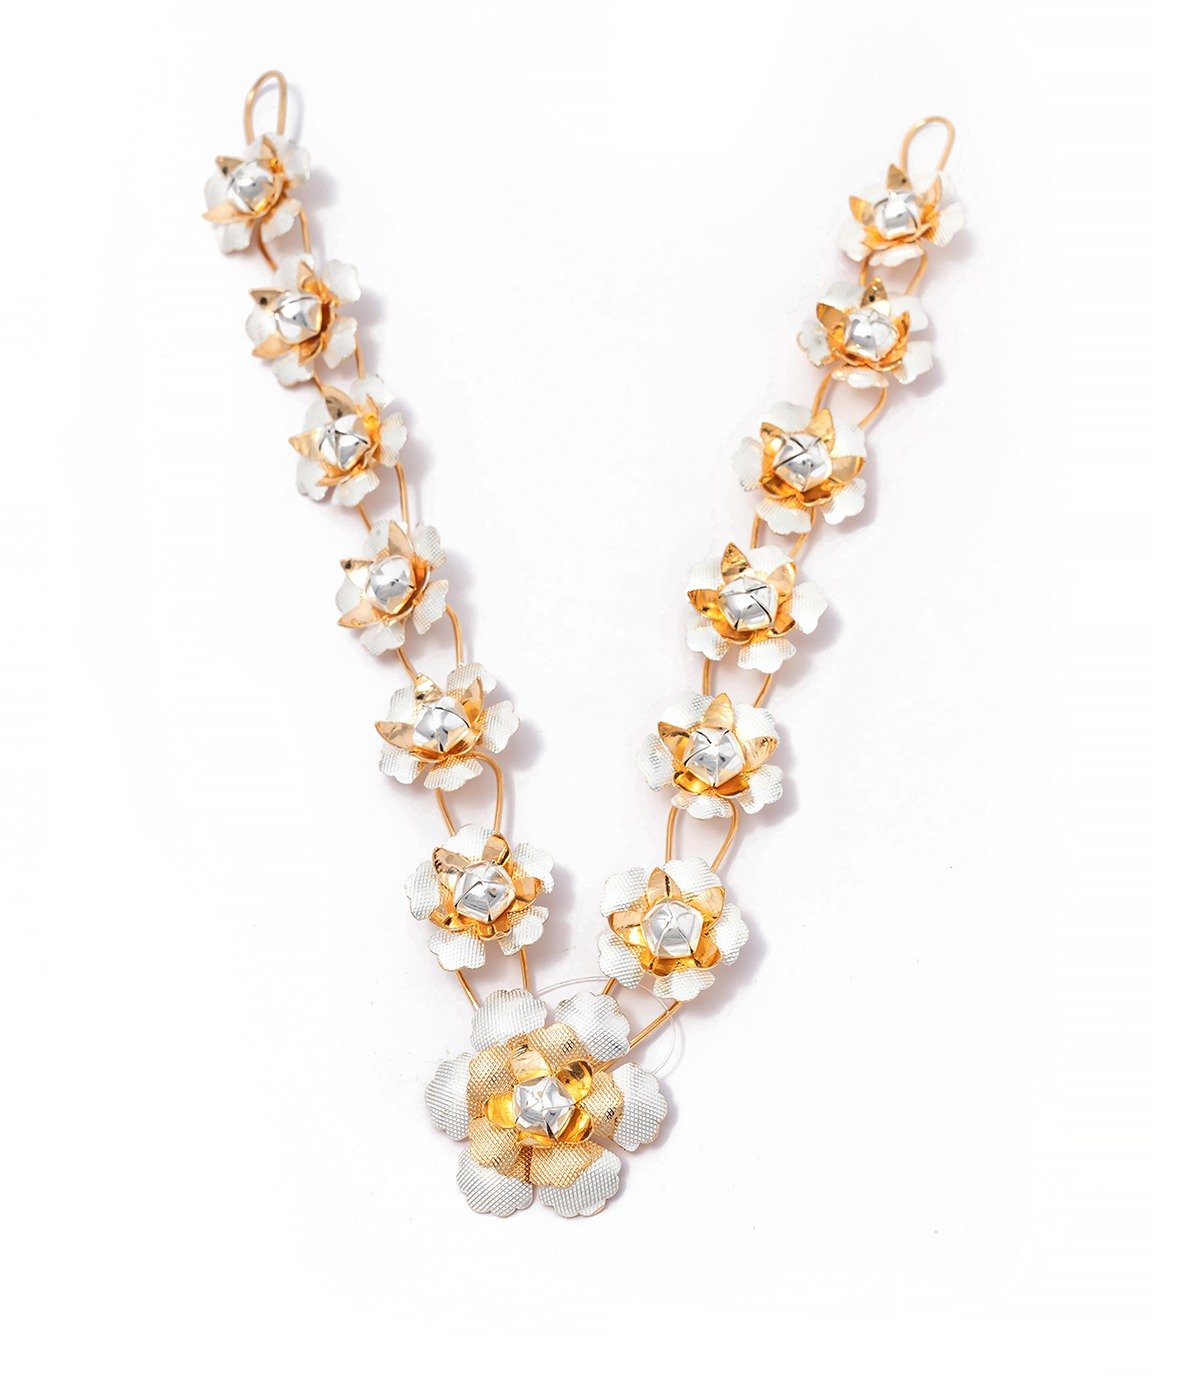 MULTIPURPOSE GOLD AND SILVER POLISHED FLORAL MALA